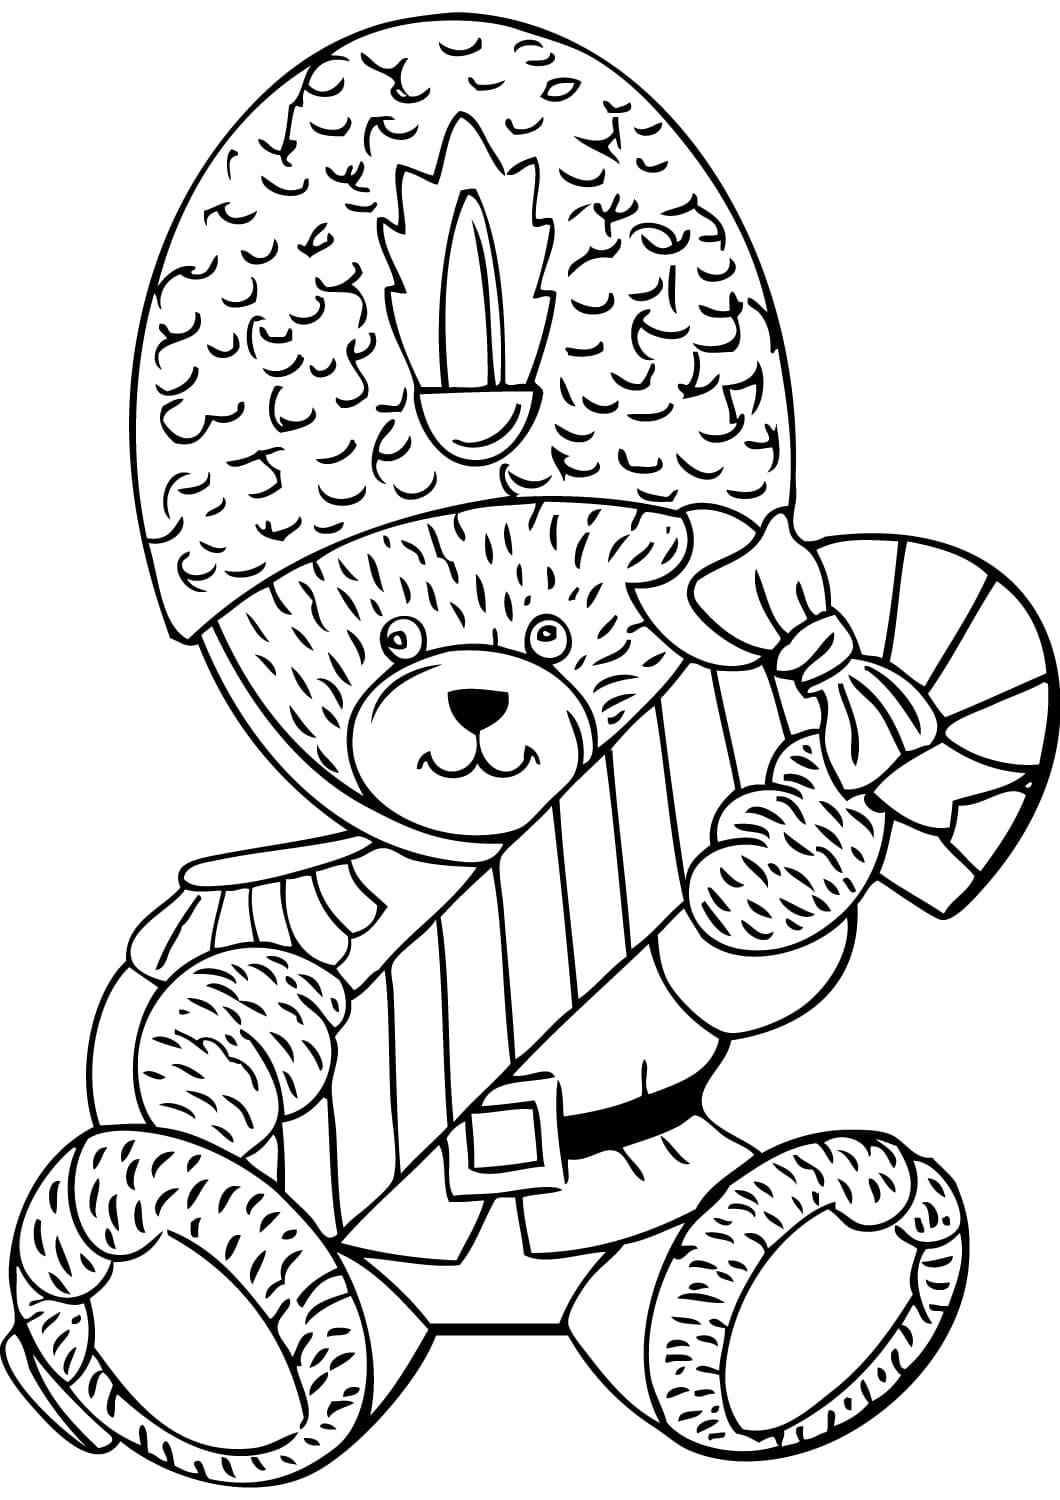 The Teddy Bear Holds The Sweet Gift Tightly Coloring Page